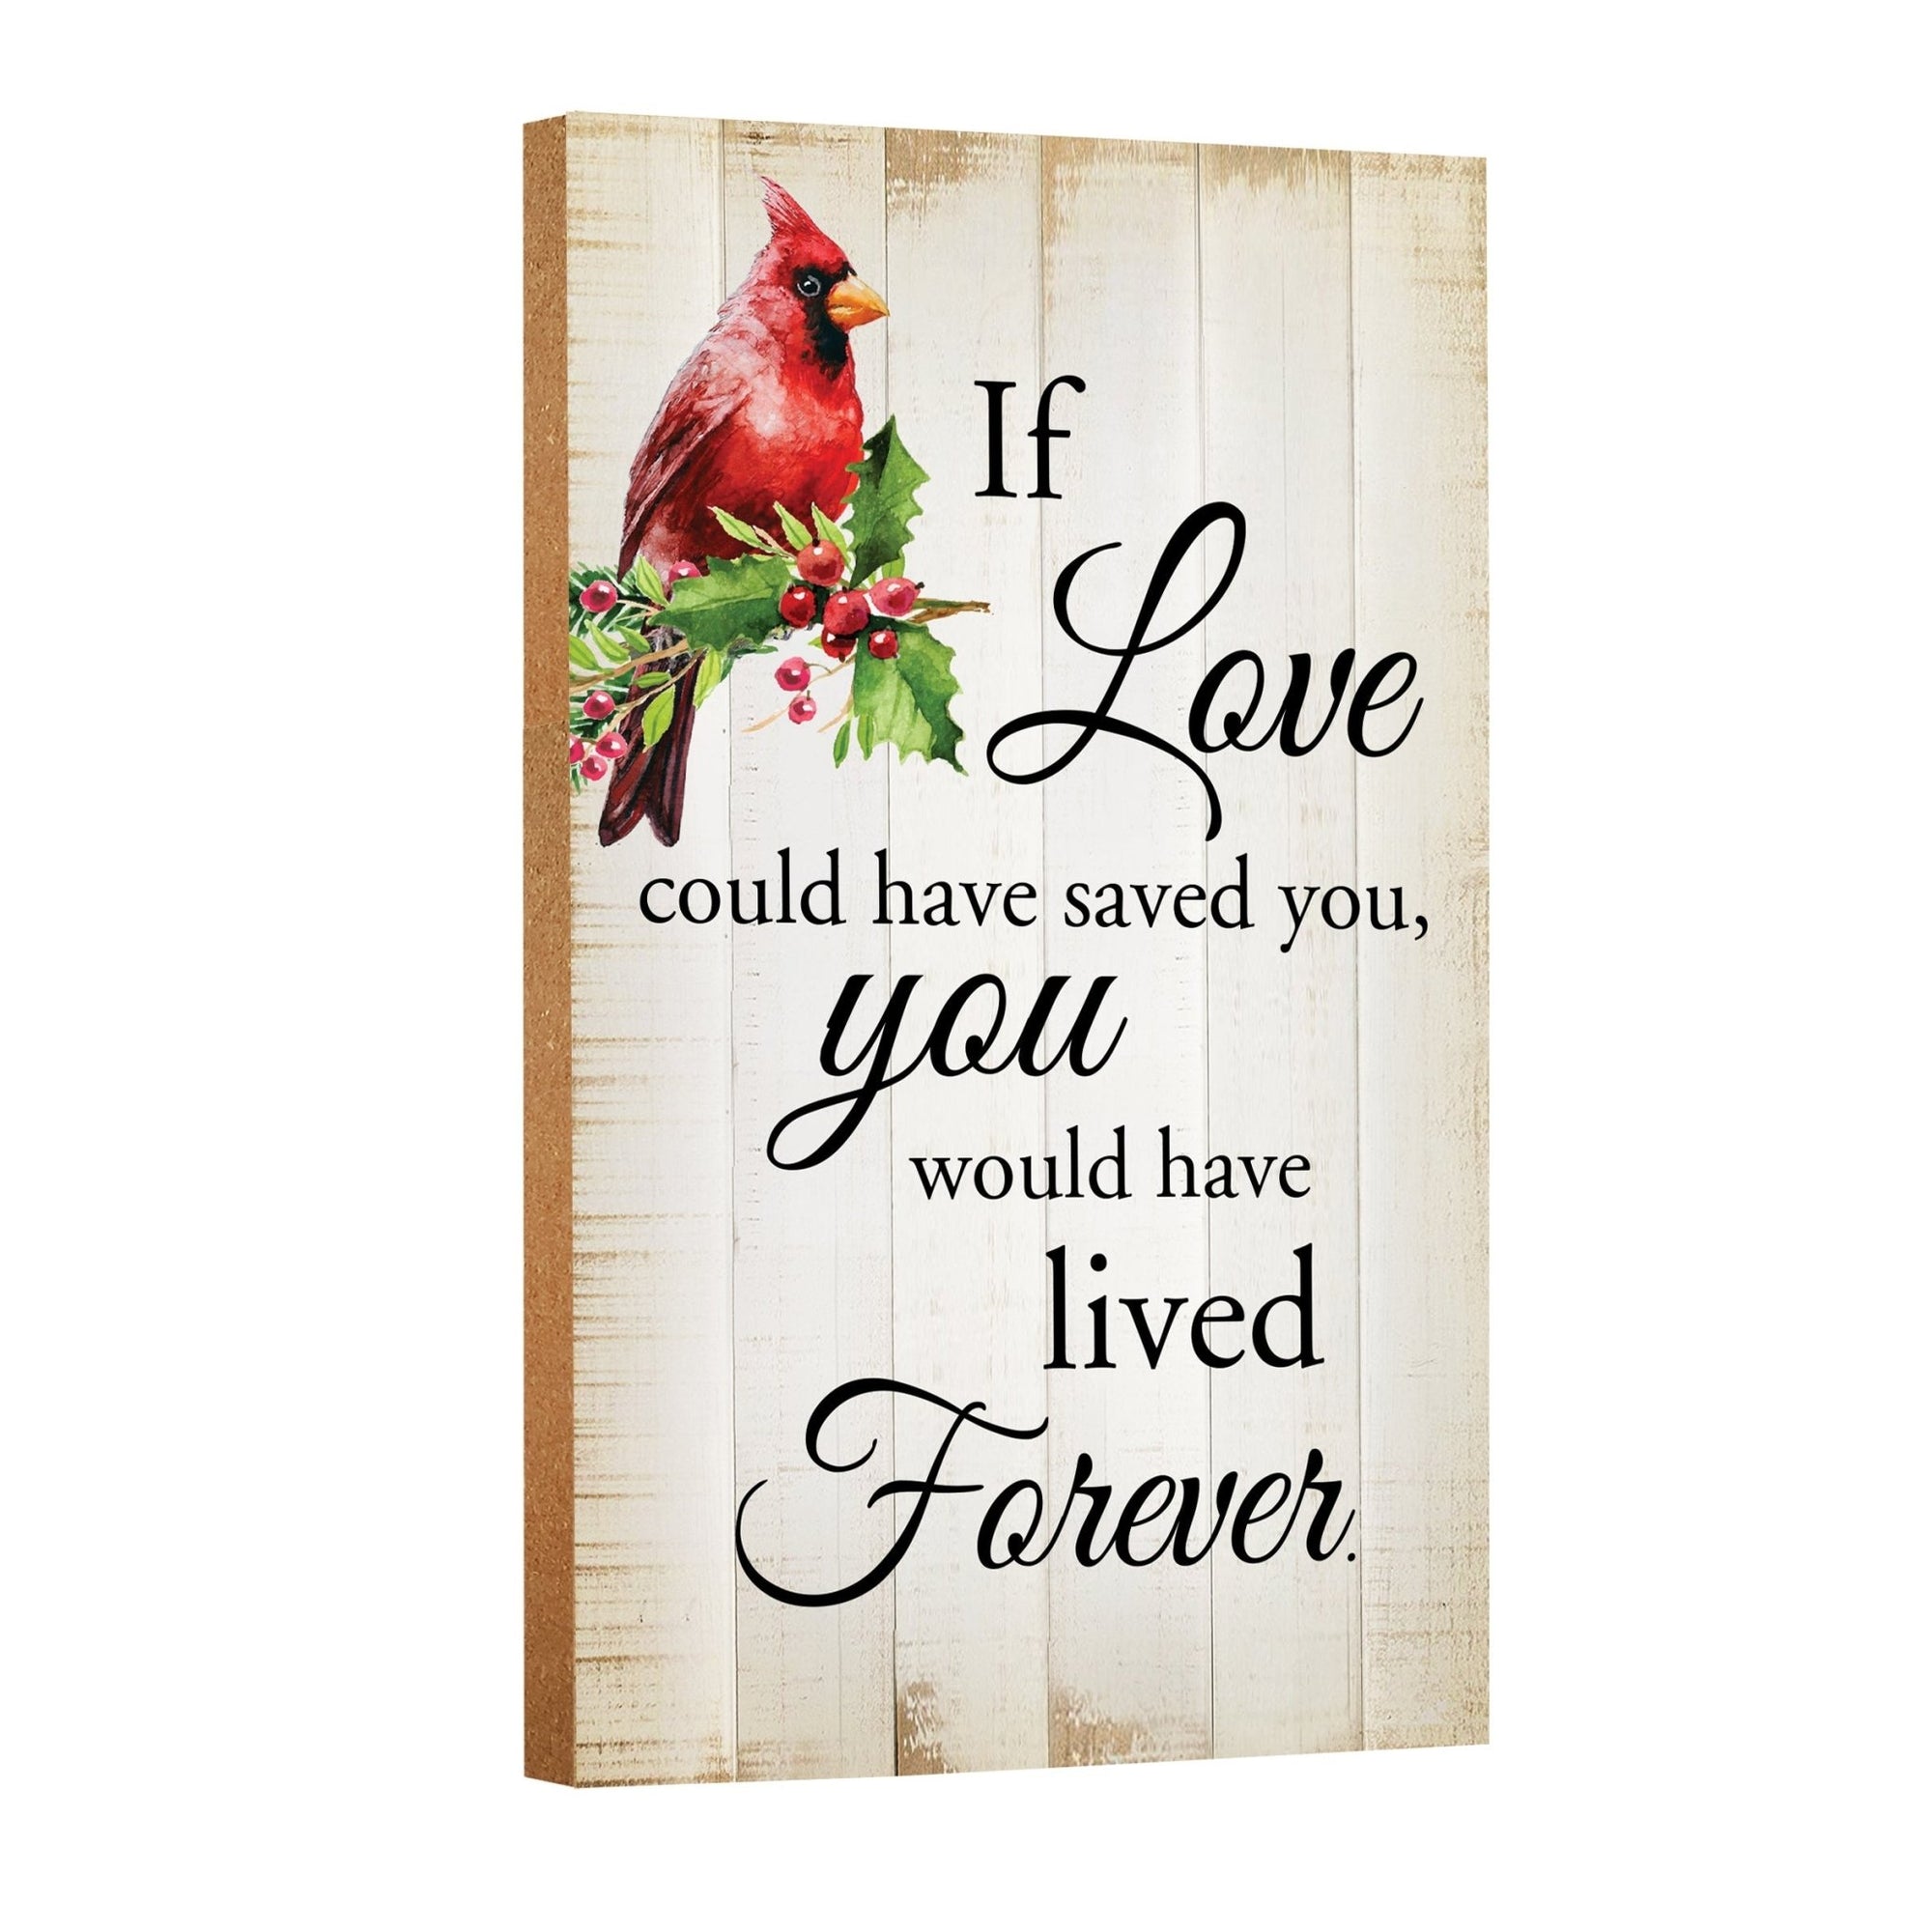 Wooden memorial decor to commemorate a loved one.